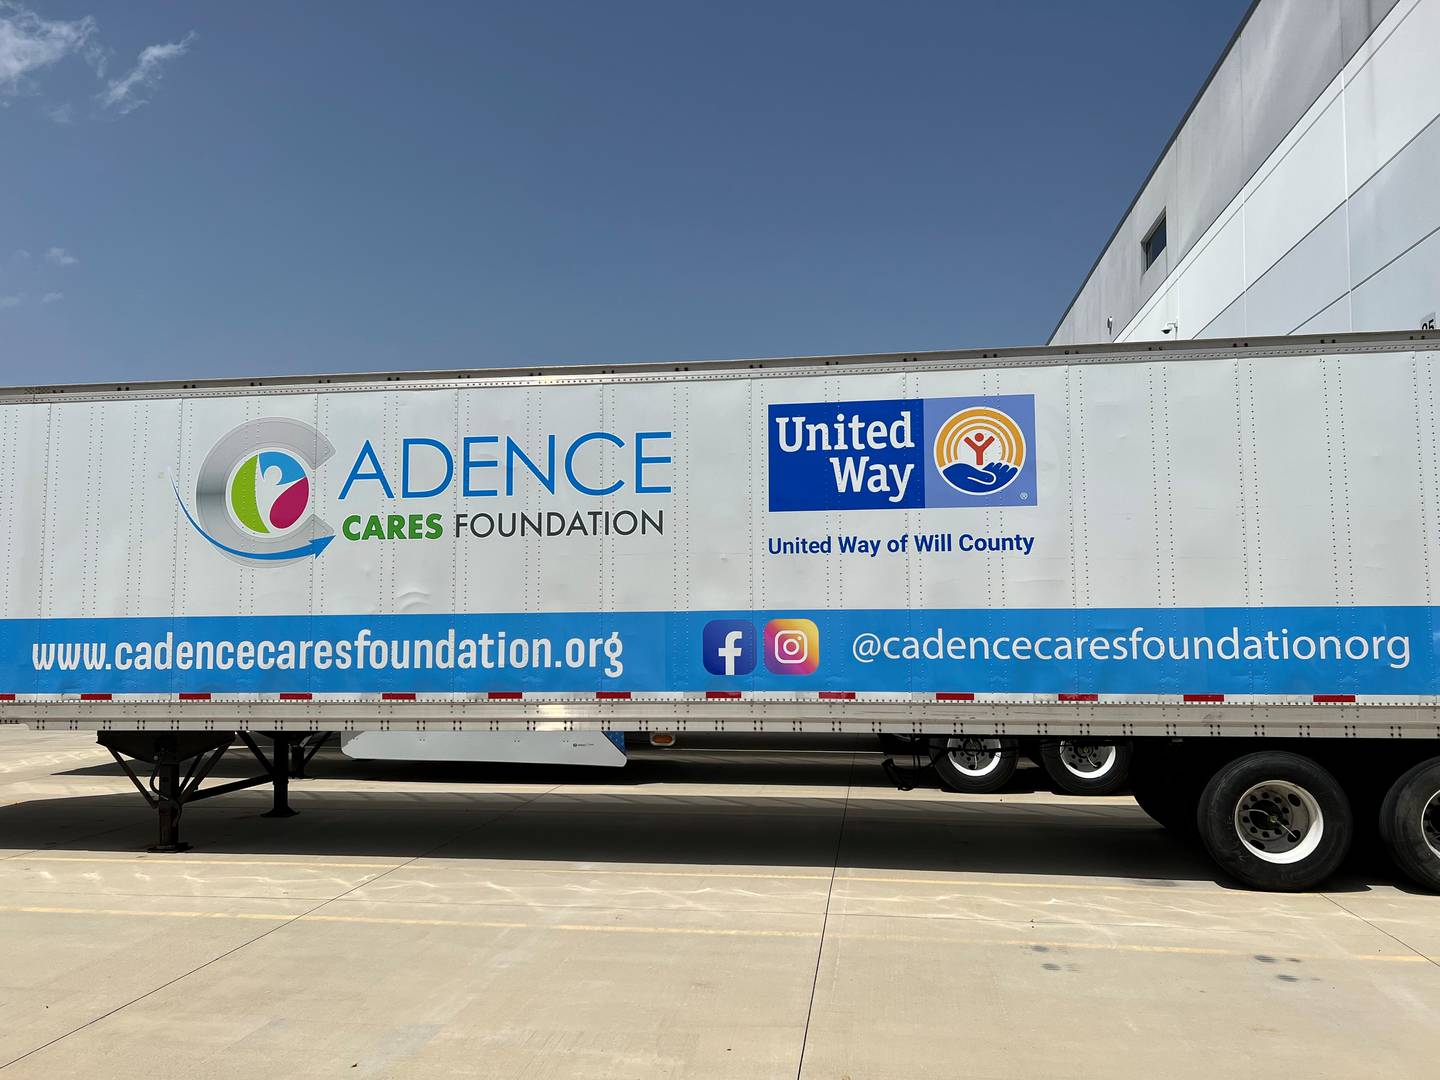 On Jan. 1, 2022, United Way of Will County partnered with an anonymous “big-box company” Cadence Premier Logistics in Joliet to help provide people with basic houseware items, such as TVs, furniture, and baby beds, strollers and car seats – any household items a large retailer would sell.